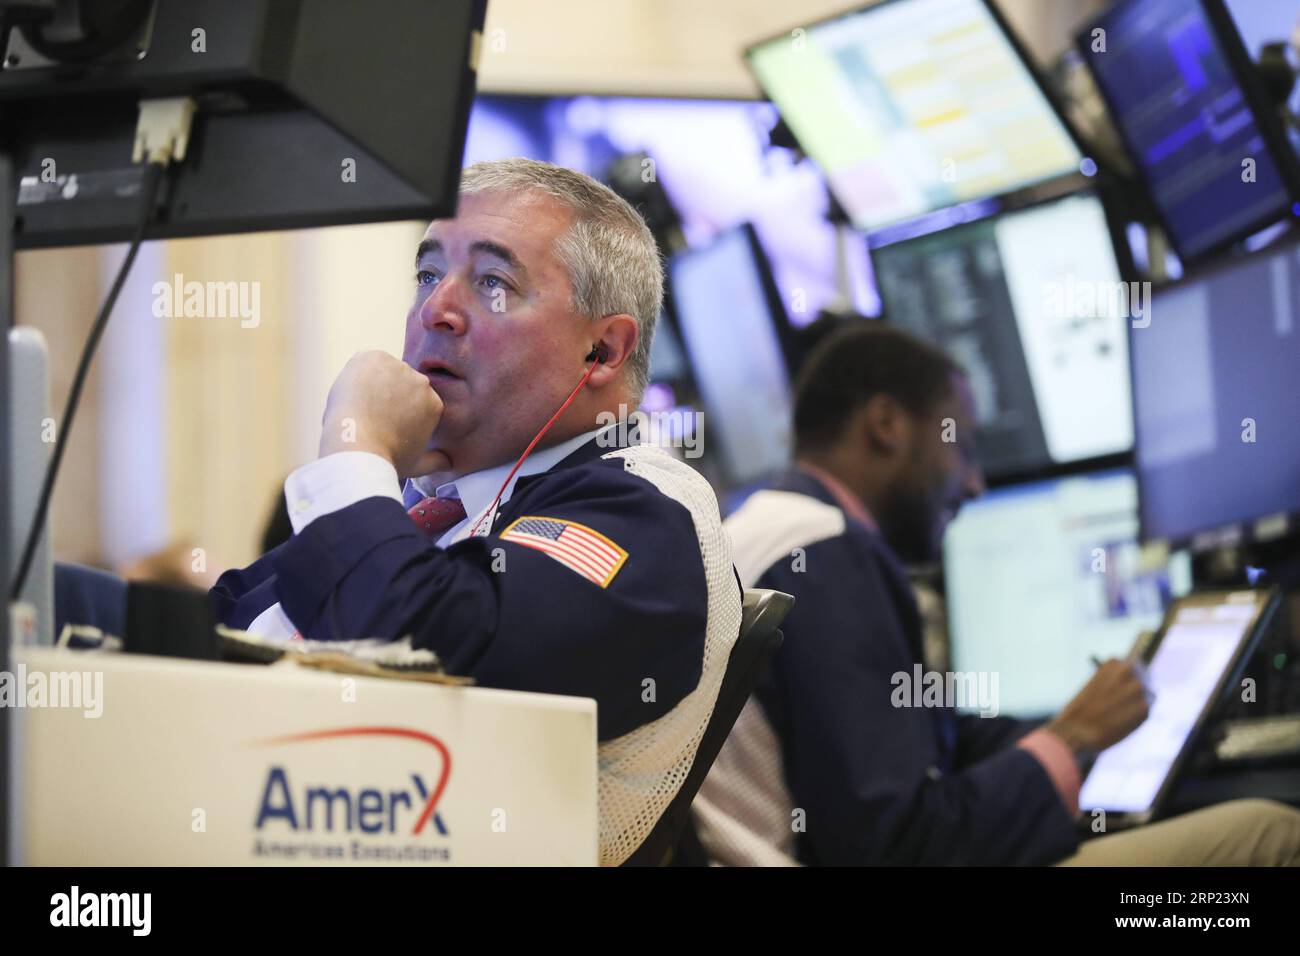 (180815) -- NEW YORK, Aug. 15, 2018 -- Traders work at the New York Stock Exchange in New York, the United States, on Aug. 15, 2018. U.S. stocks closed lower on Wednesday. The Dow Jones Industrial Average fell 137.51 points, or 0.54 percent, to 25,162.41. The S&P 500 was down 21.59 points, or 0.76 percent, to 2,818.37. The Nasdaq Composite Index dropped 96.78 points, or 1.23 percent, to 7,774.12. ) U.S.-NEW YORK-STOCKS WangxYing PUBLICATIONxNOTxINxCHN Stock Photo